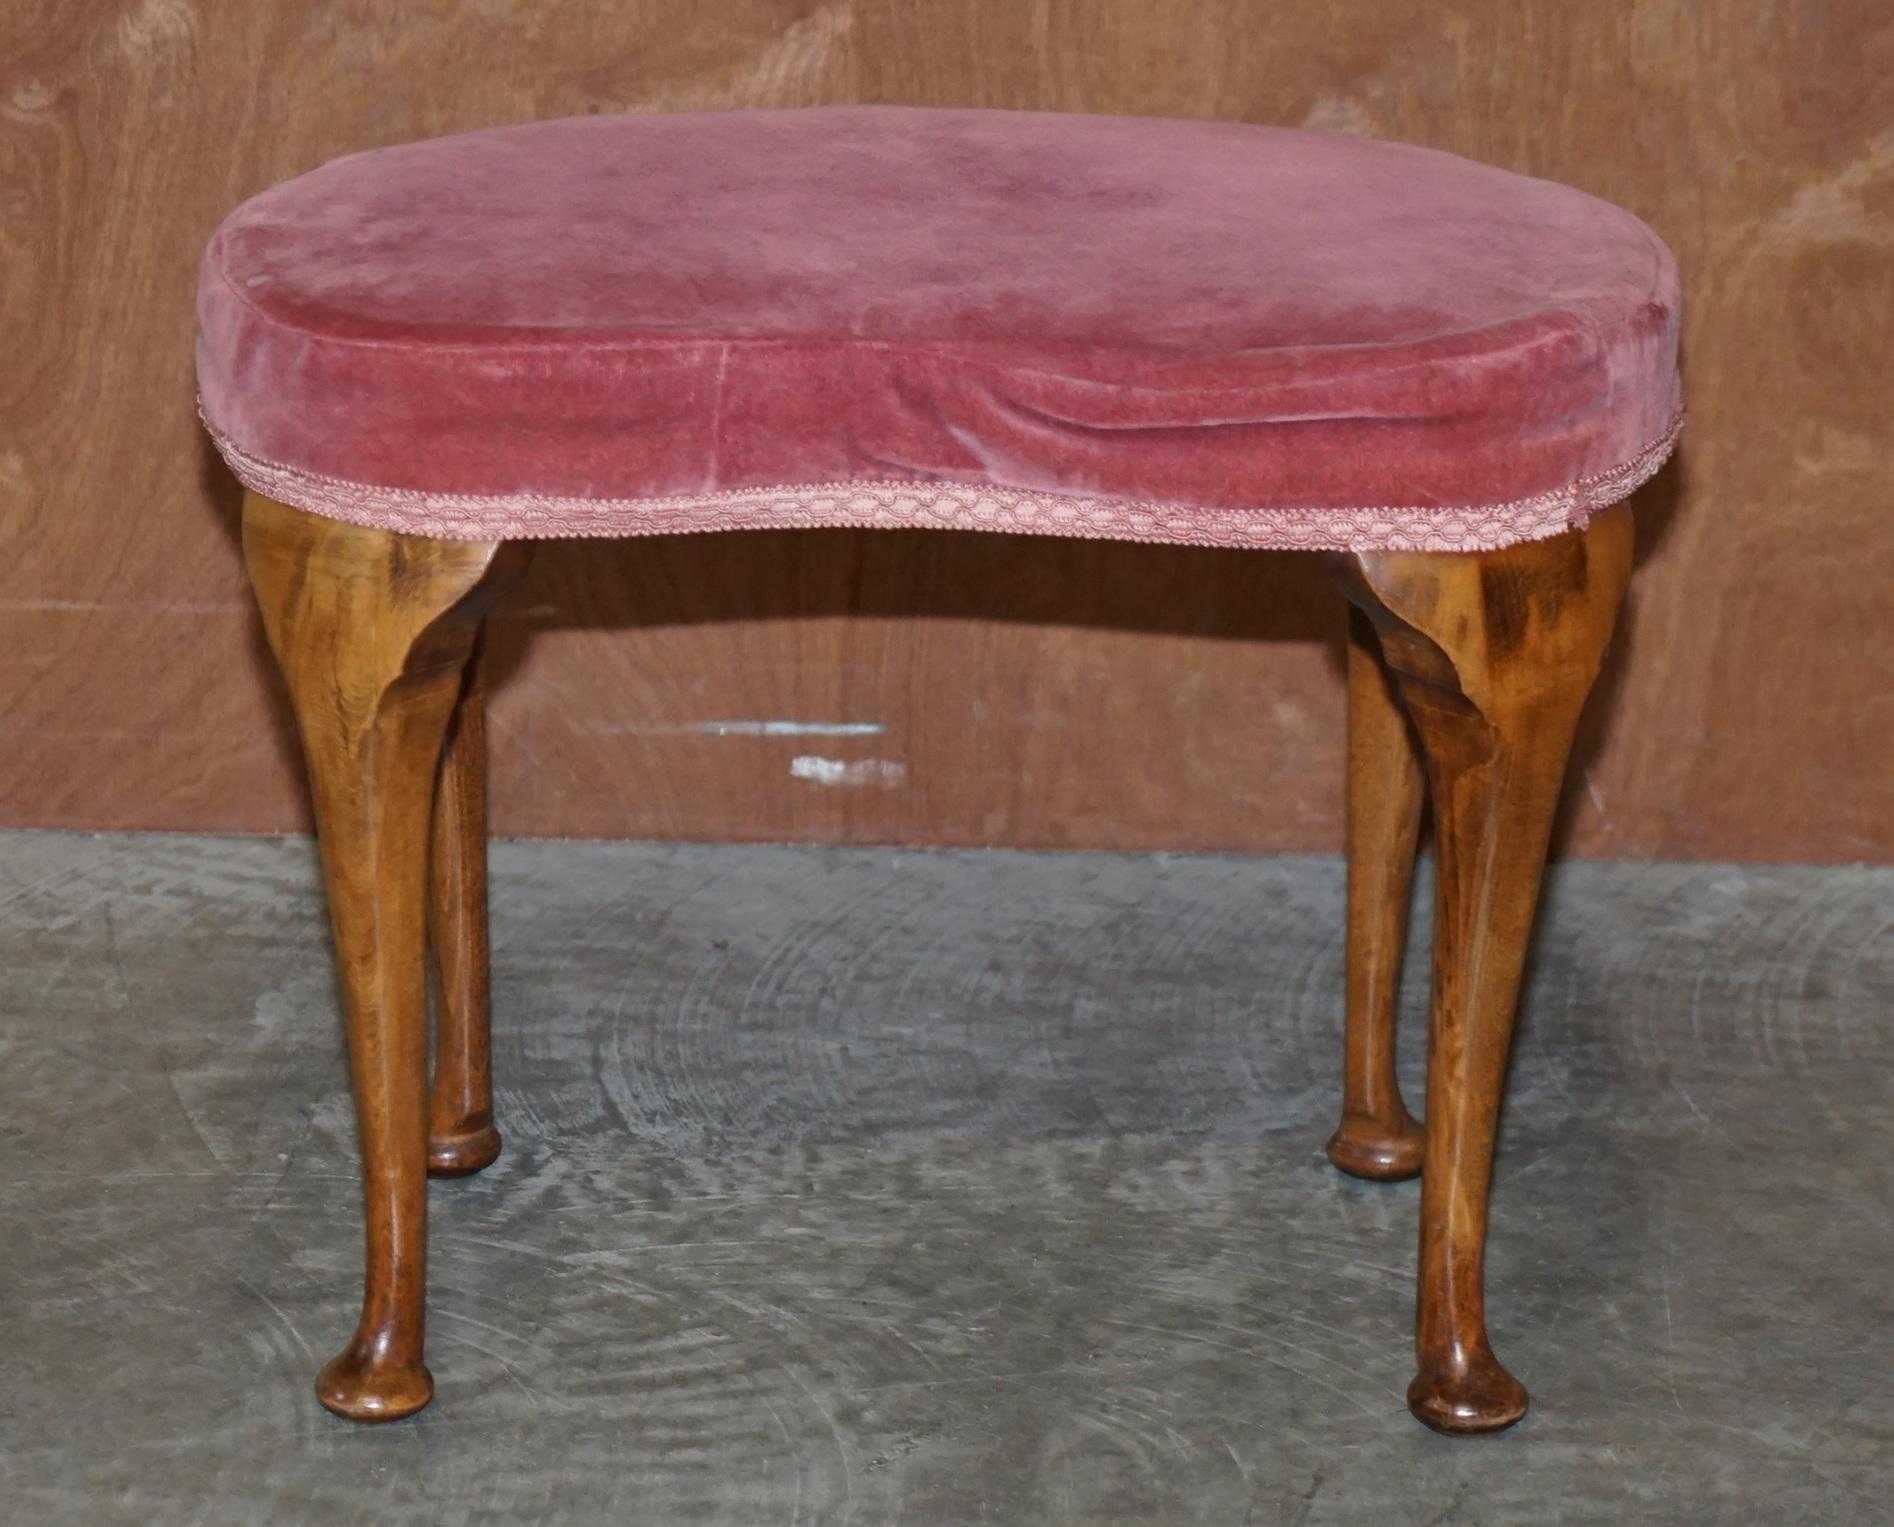 We are delighted to offer this lovely antique circa 1920’s Art Deco Kidney bean shaped dressing table stool

A very good looking well made and decorative stool, it is very much of the period and has a great look and feel to it

We have cleaned